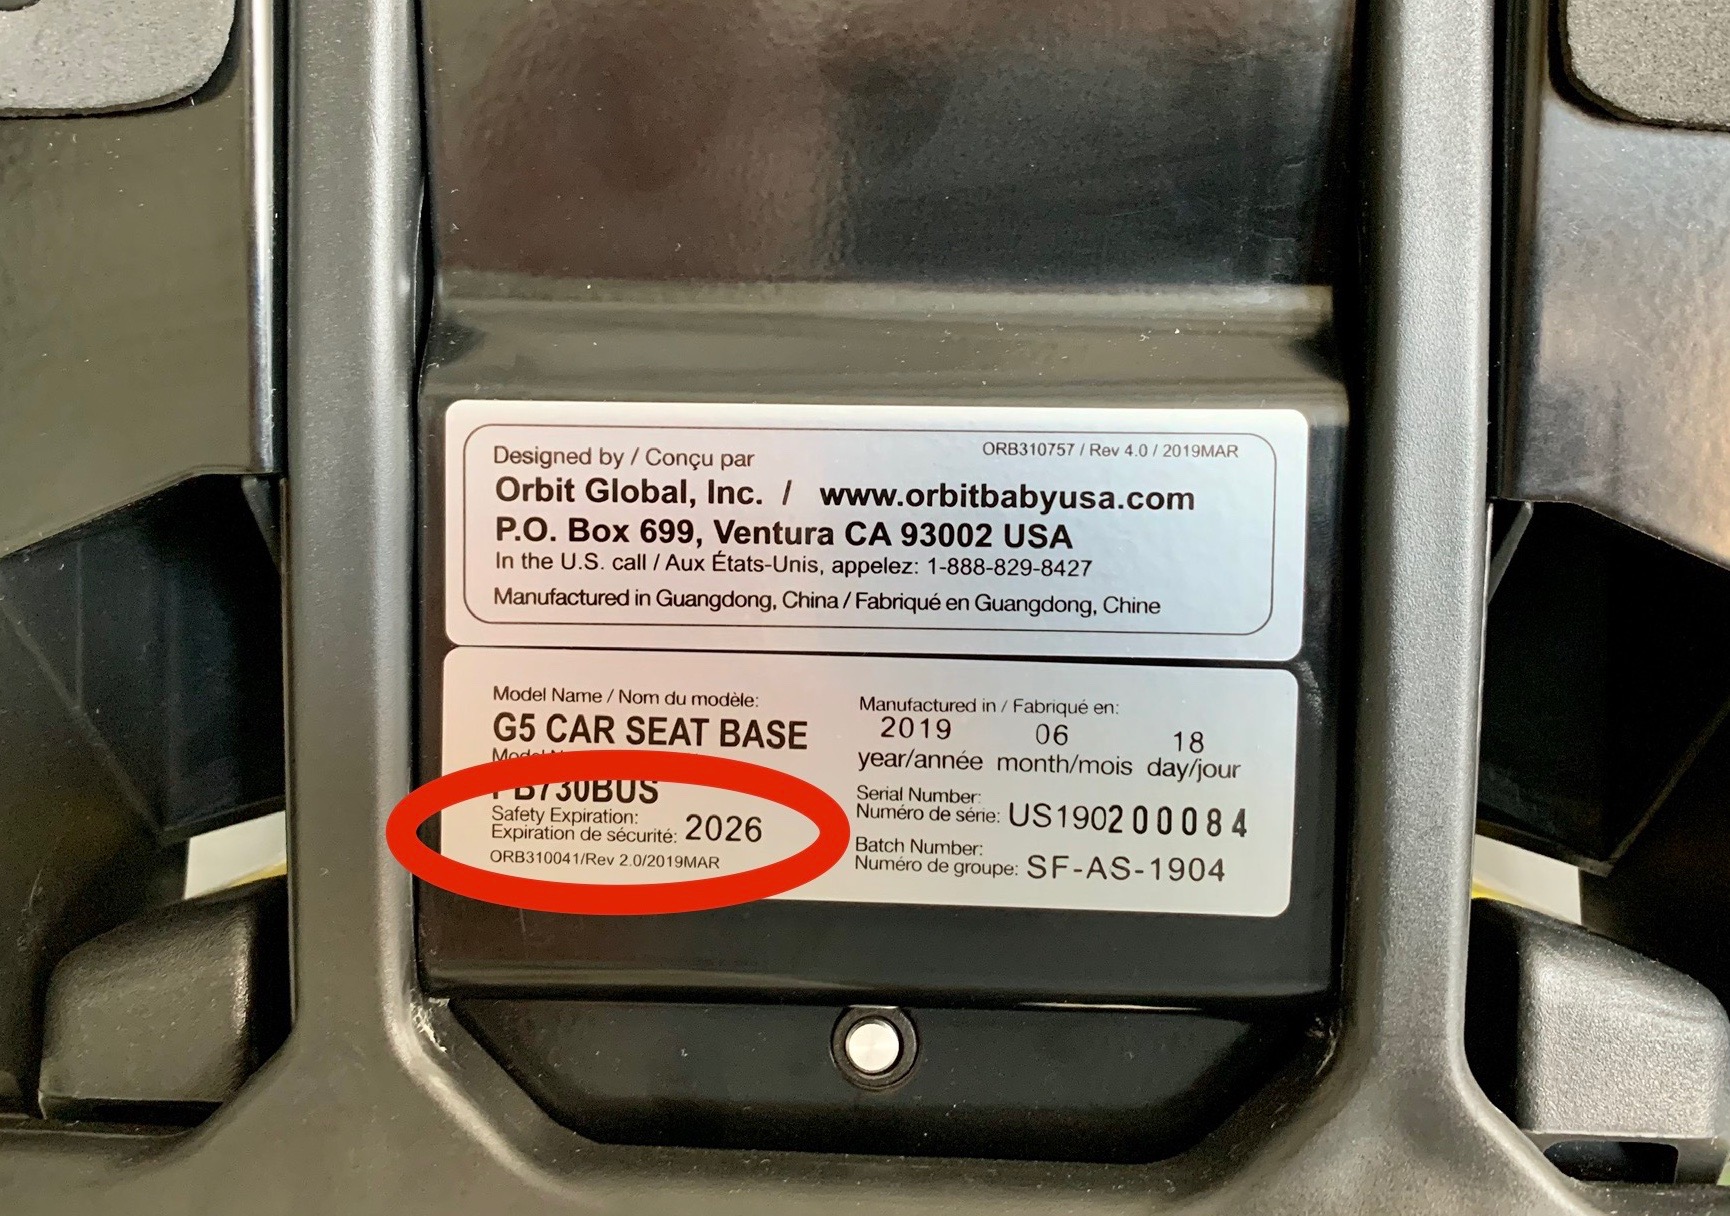 Does My Car Seat Expire When, What Are The Expiration Dates On Car Seats